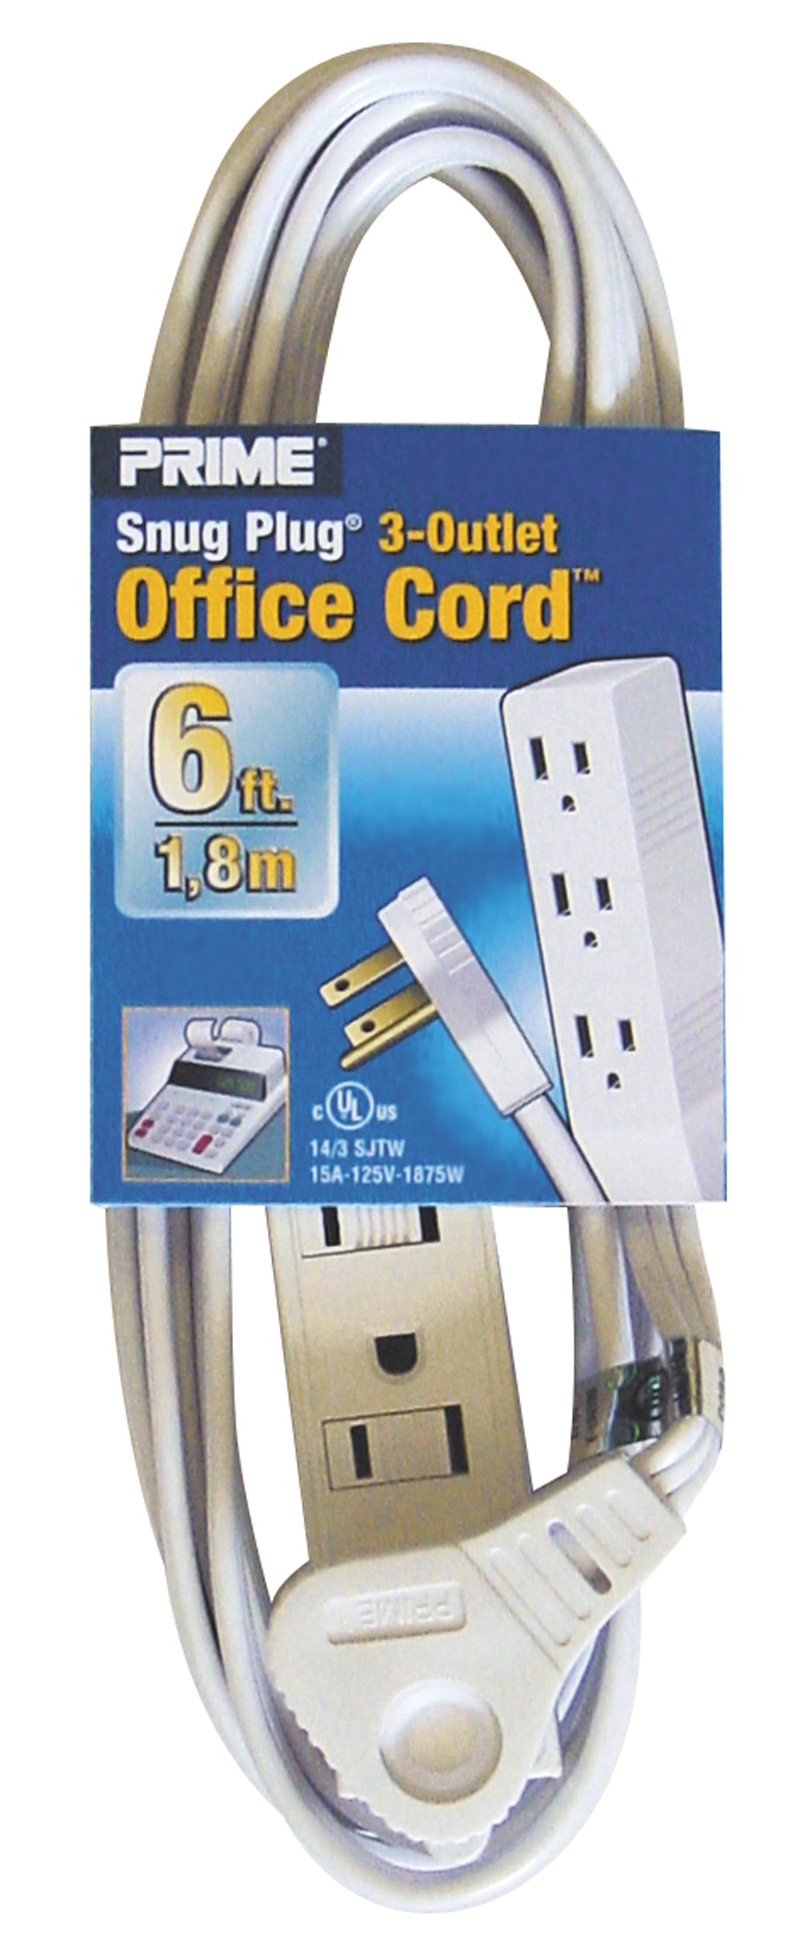 Prime Wire & Cable EC930706K 6-Foot 14/3 SJT 3-Outlet Office Cord, White